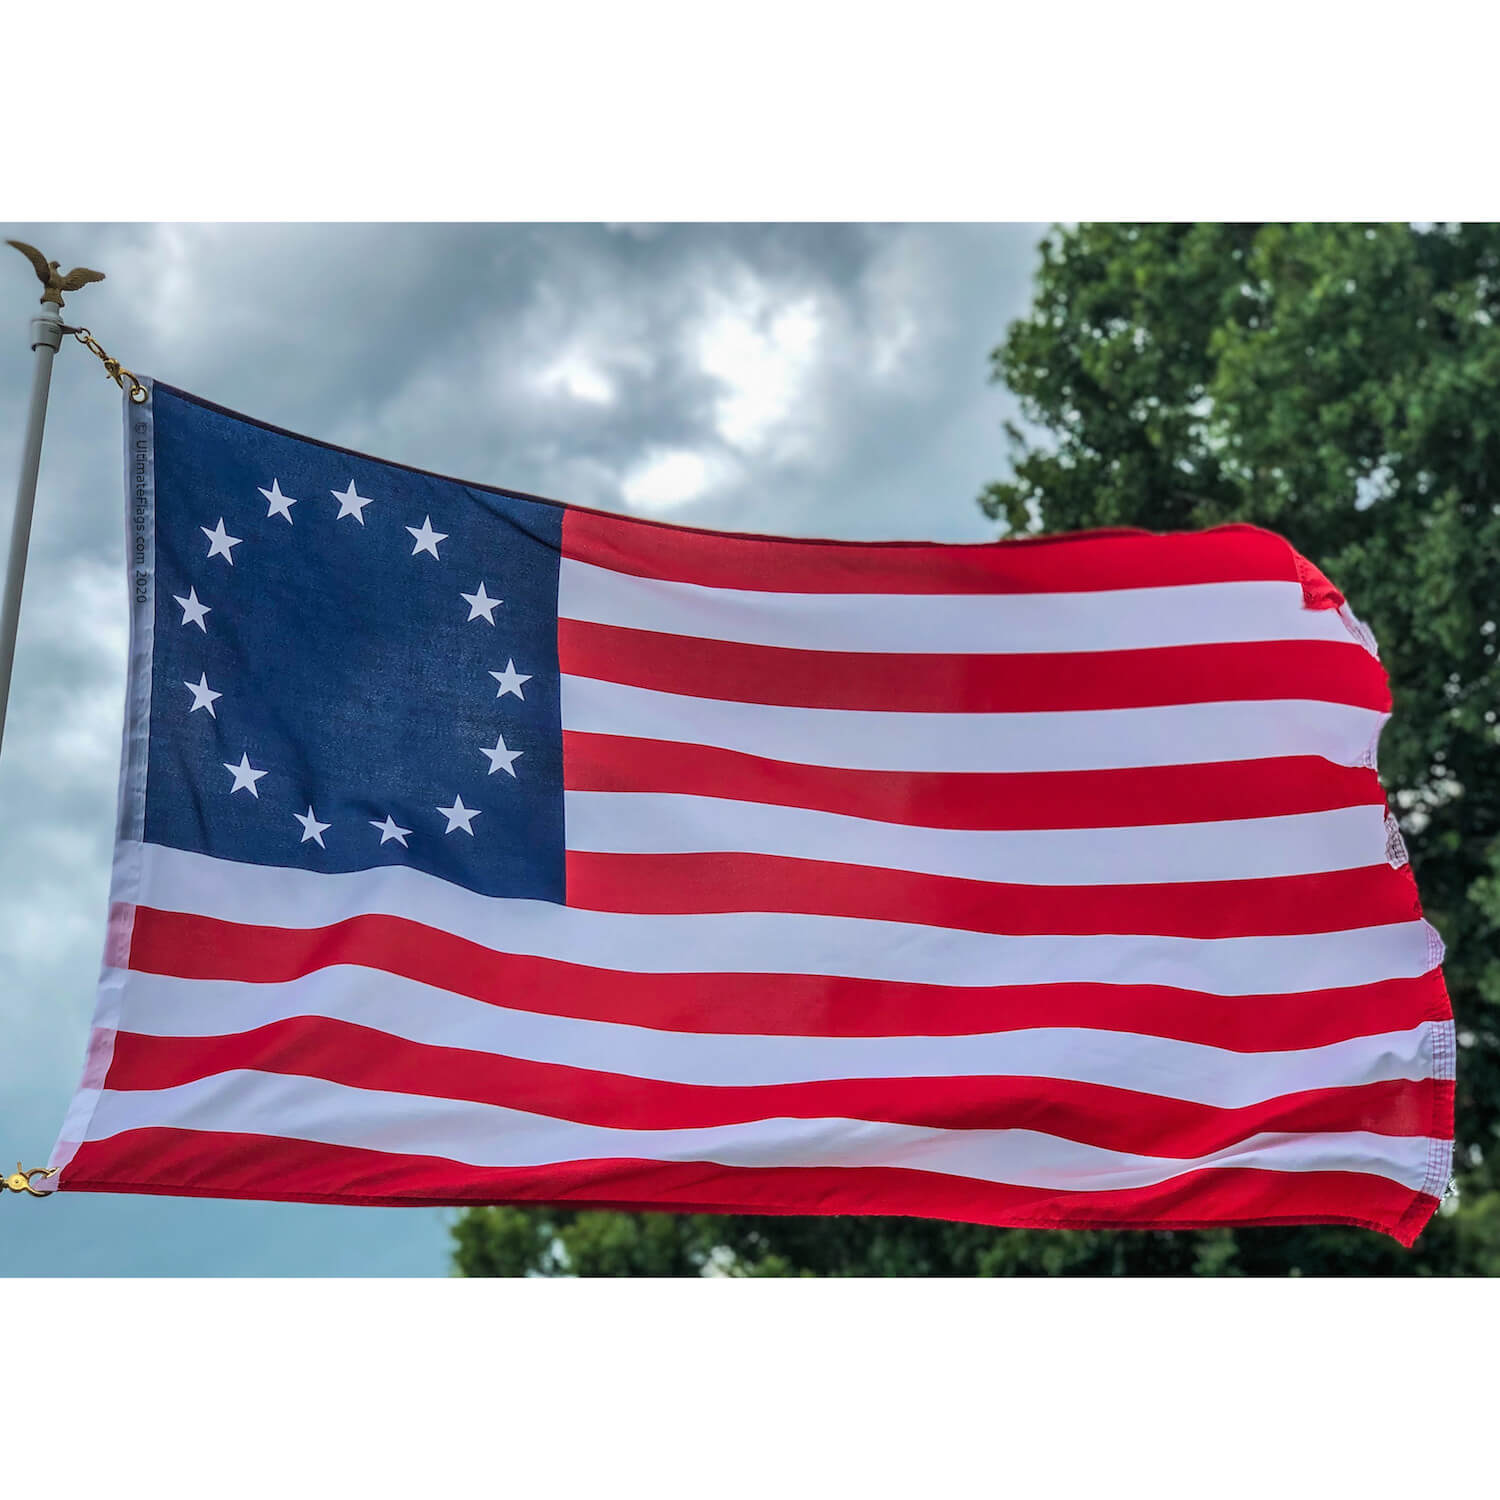 Experience the Richness of History at Ultimate Flags Inc